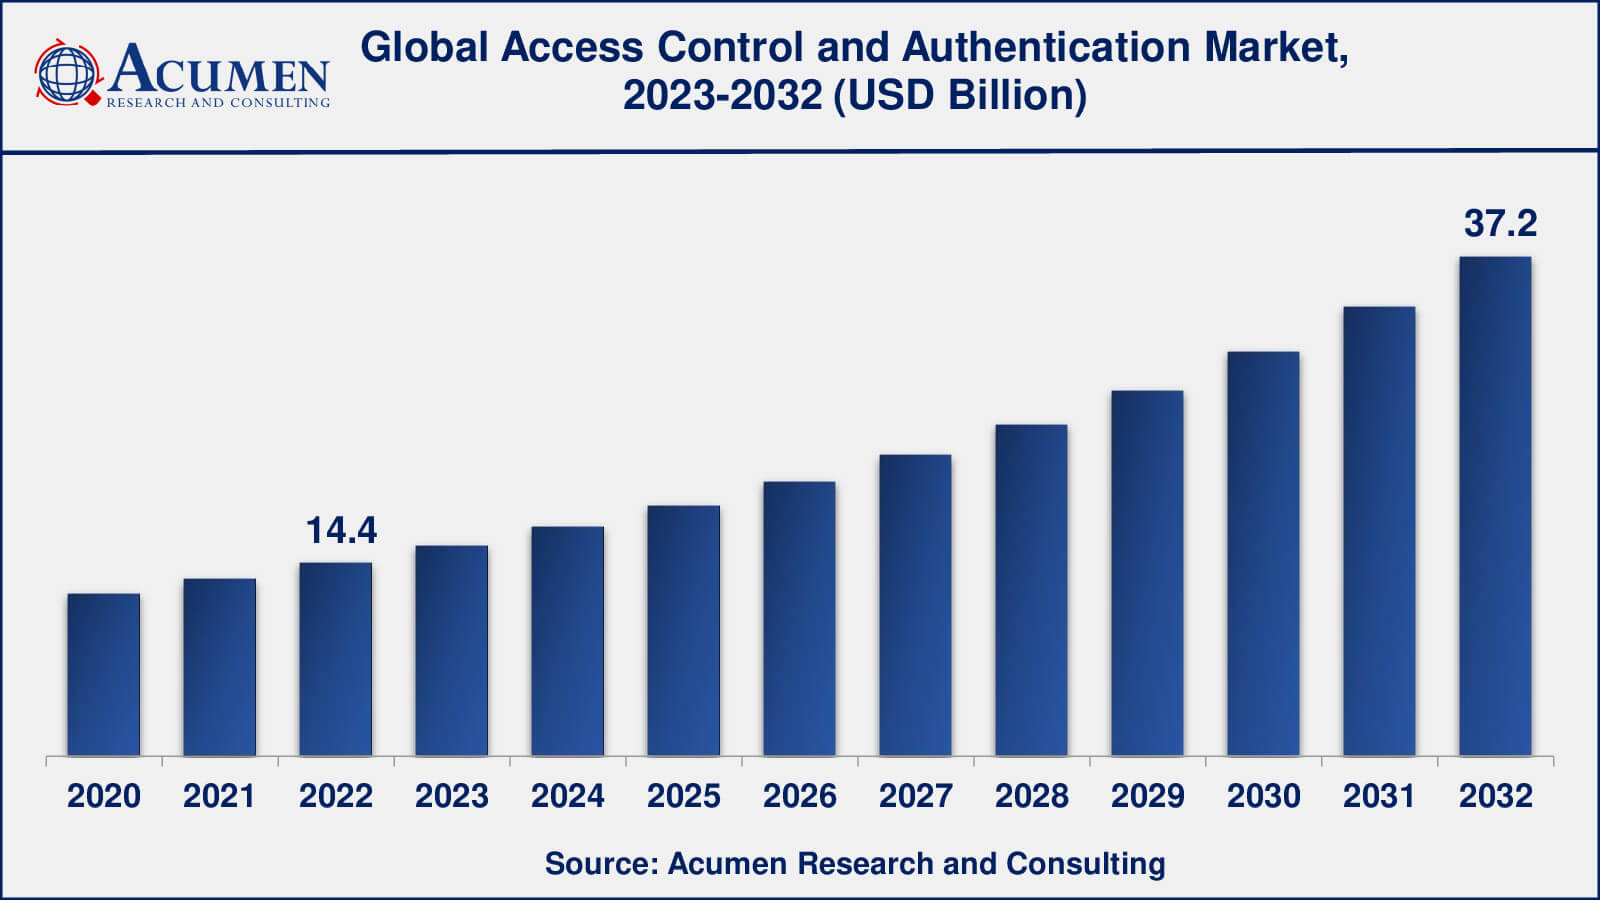 Global Access Control and Authentication Market Dynamics